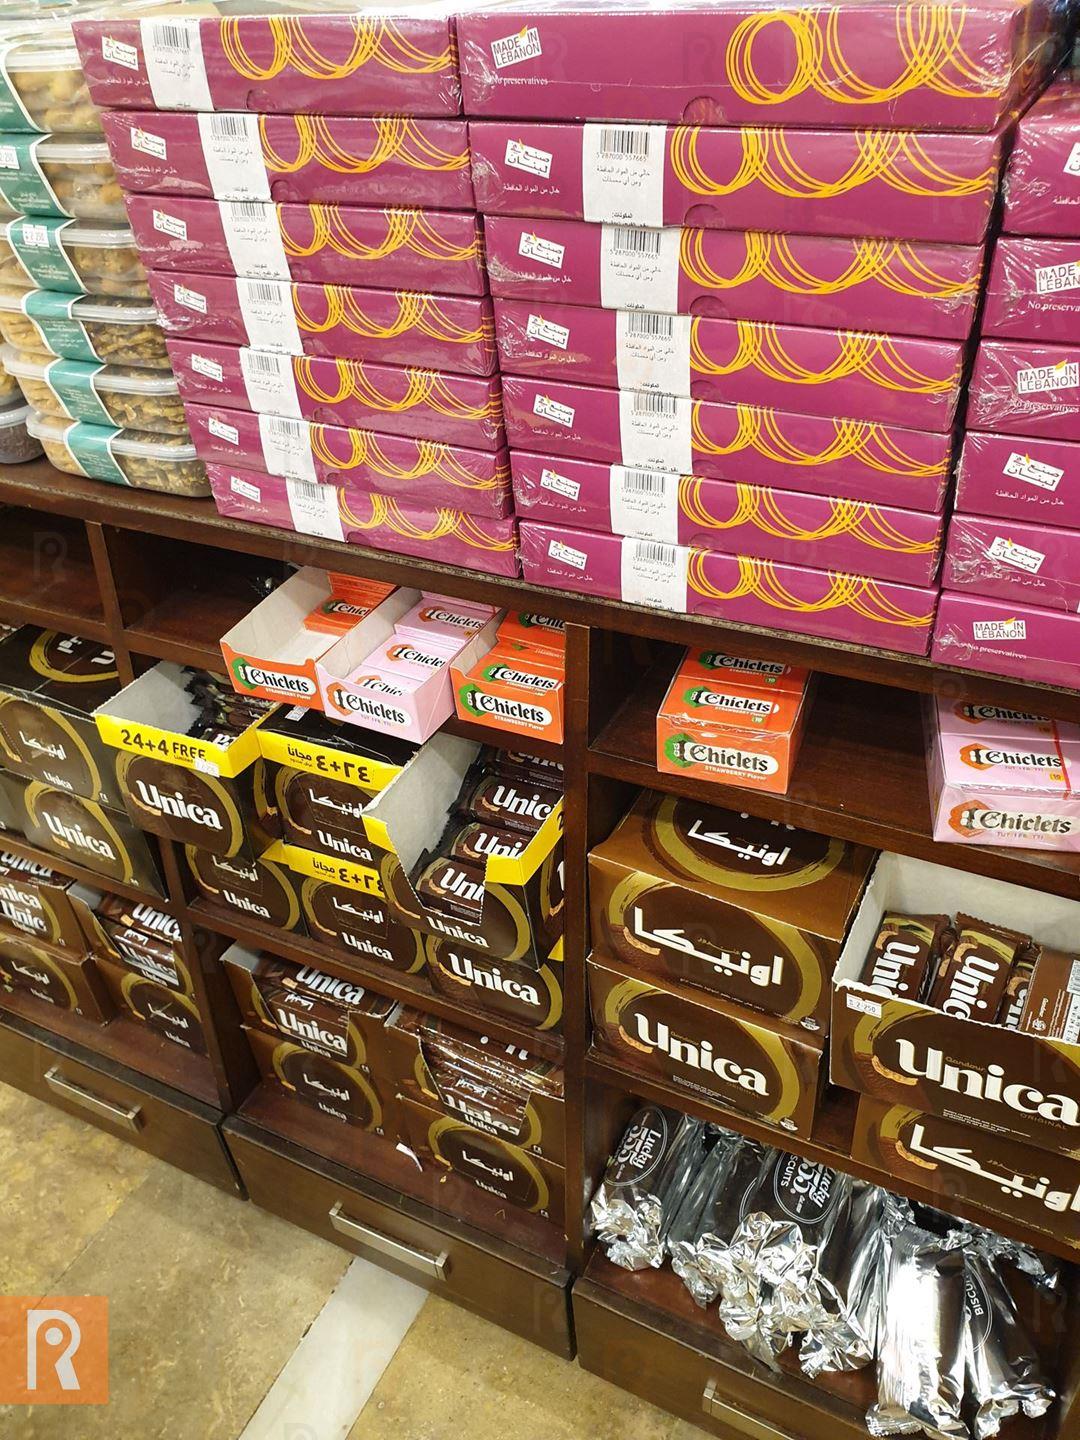 Where to find Lebanese Products in Kuwait?